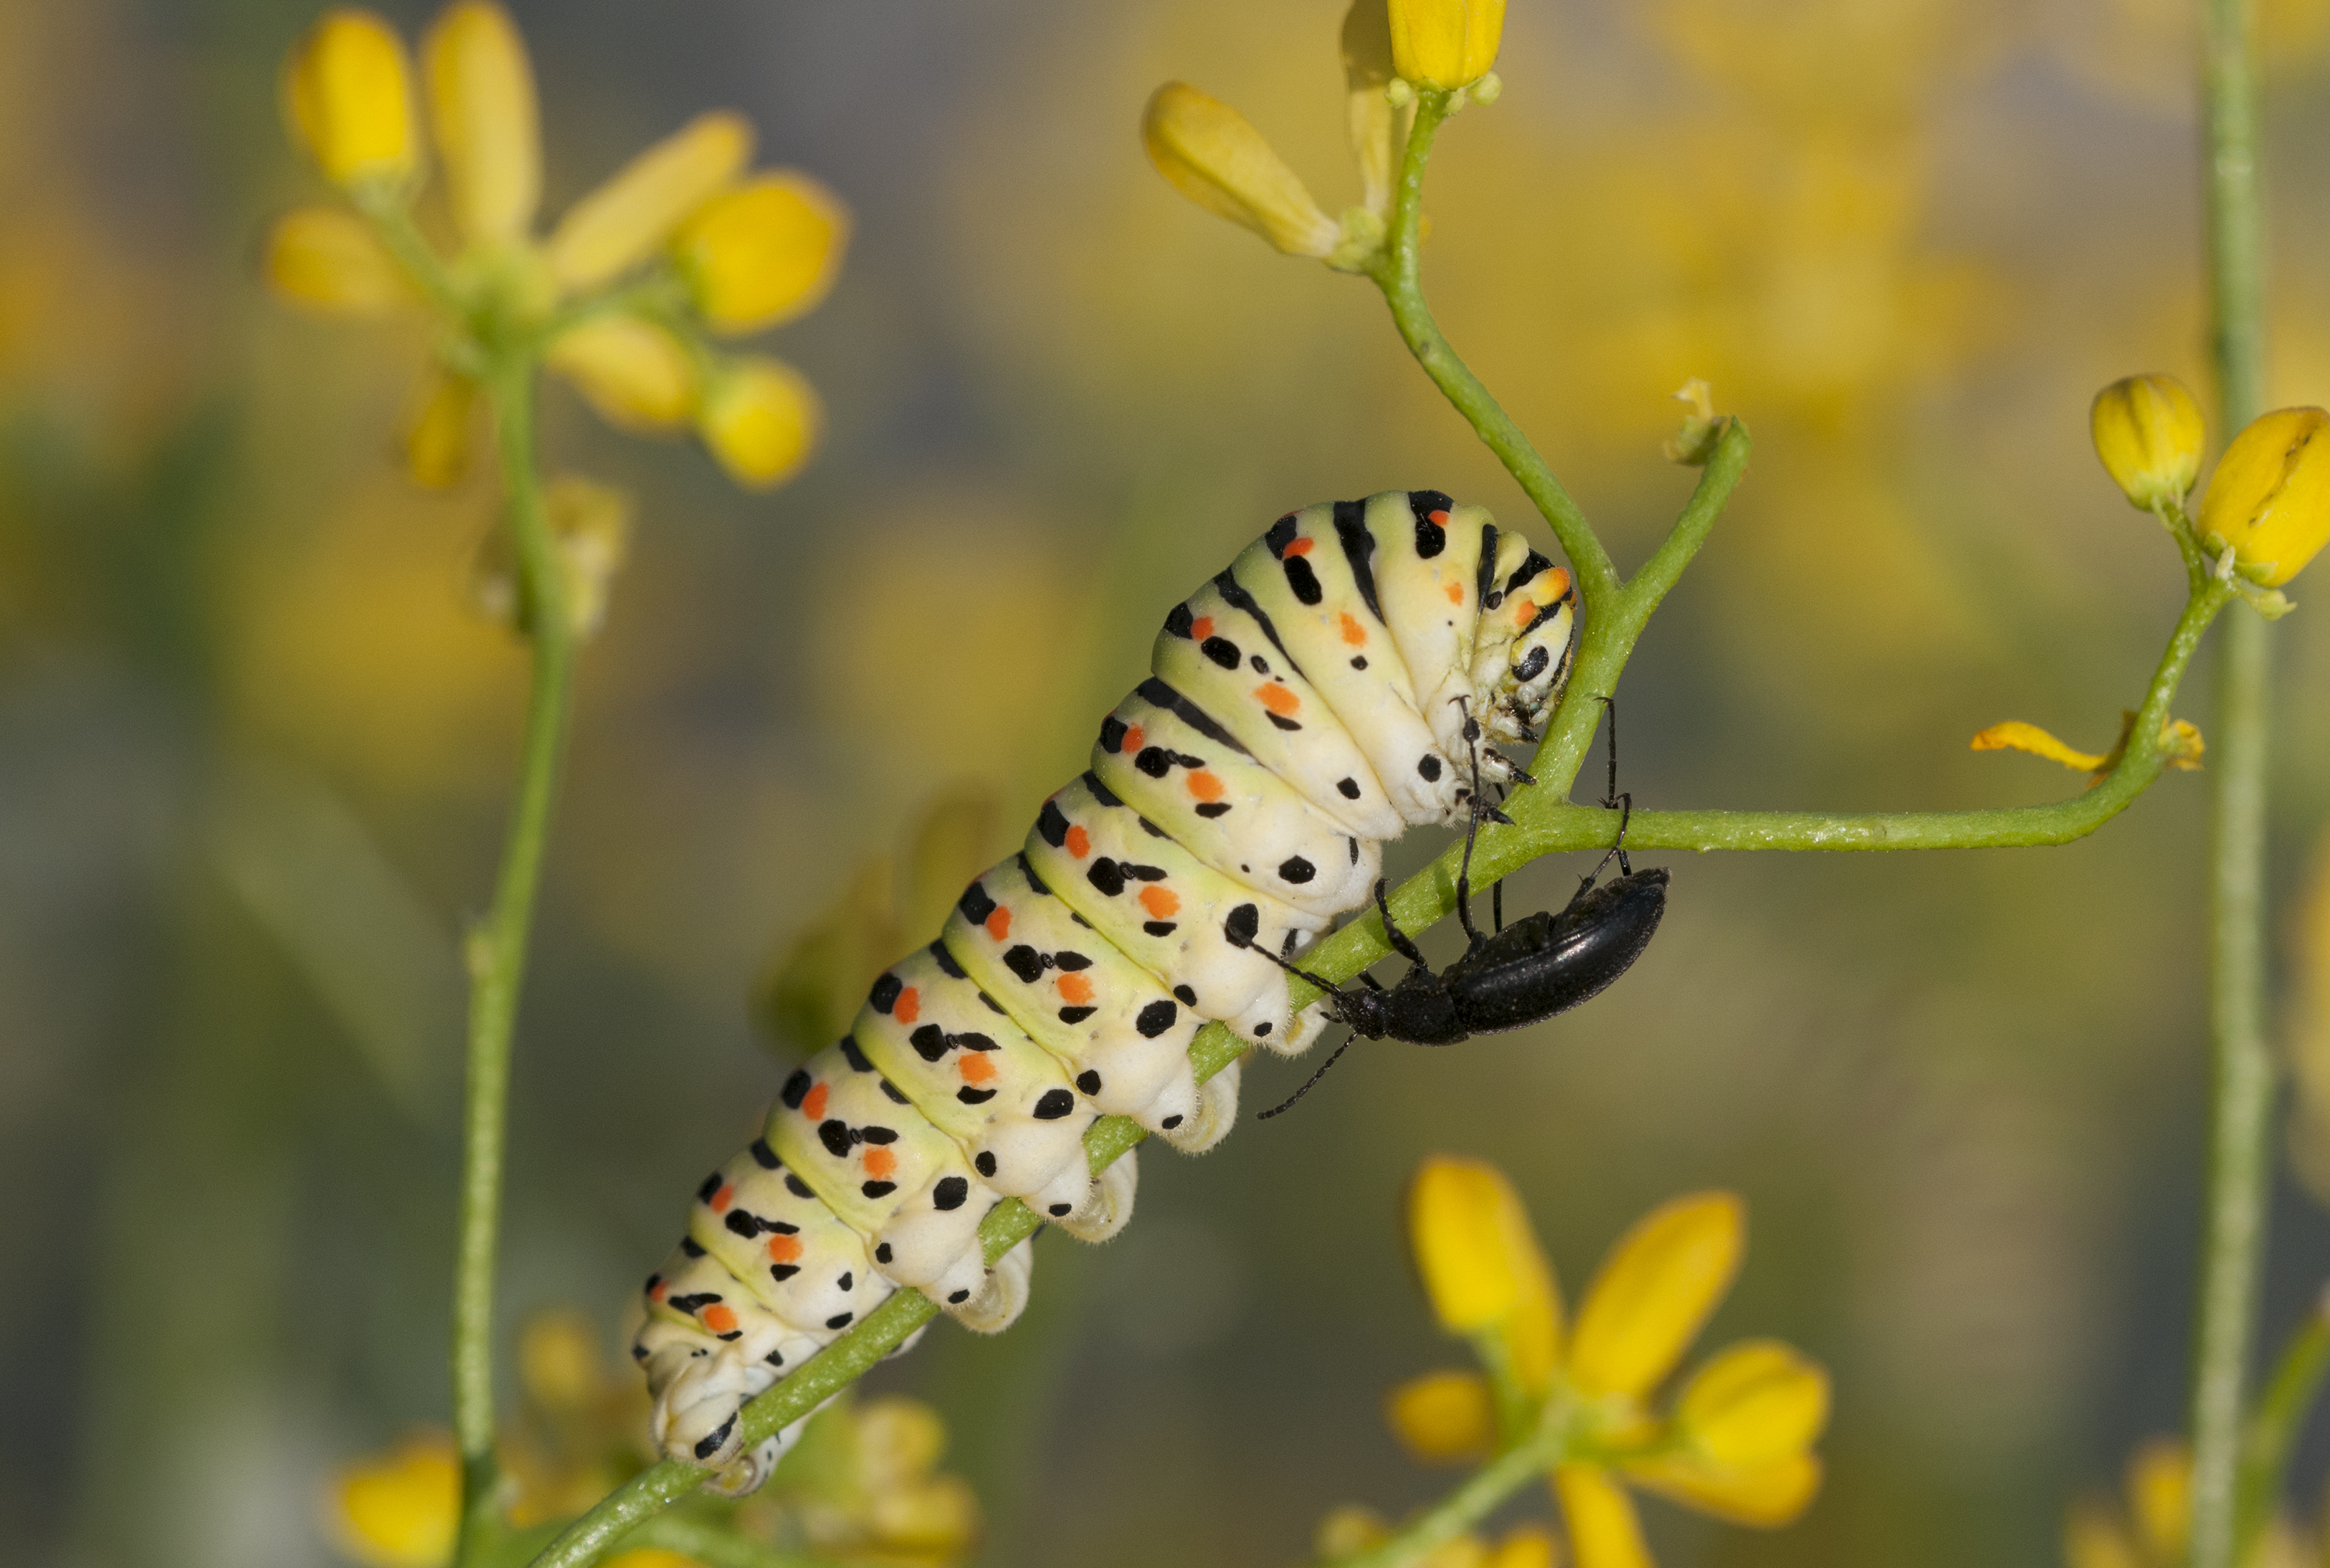 Old World Swallowtail Caterpillar and a Beetle by Zeynel Cebeci